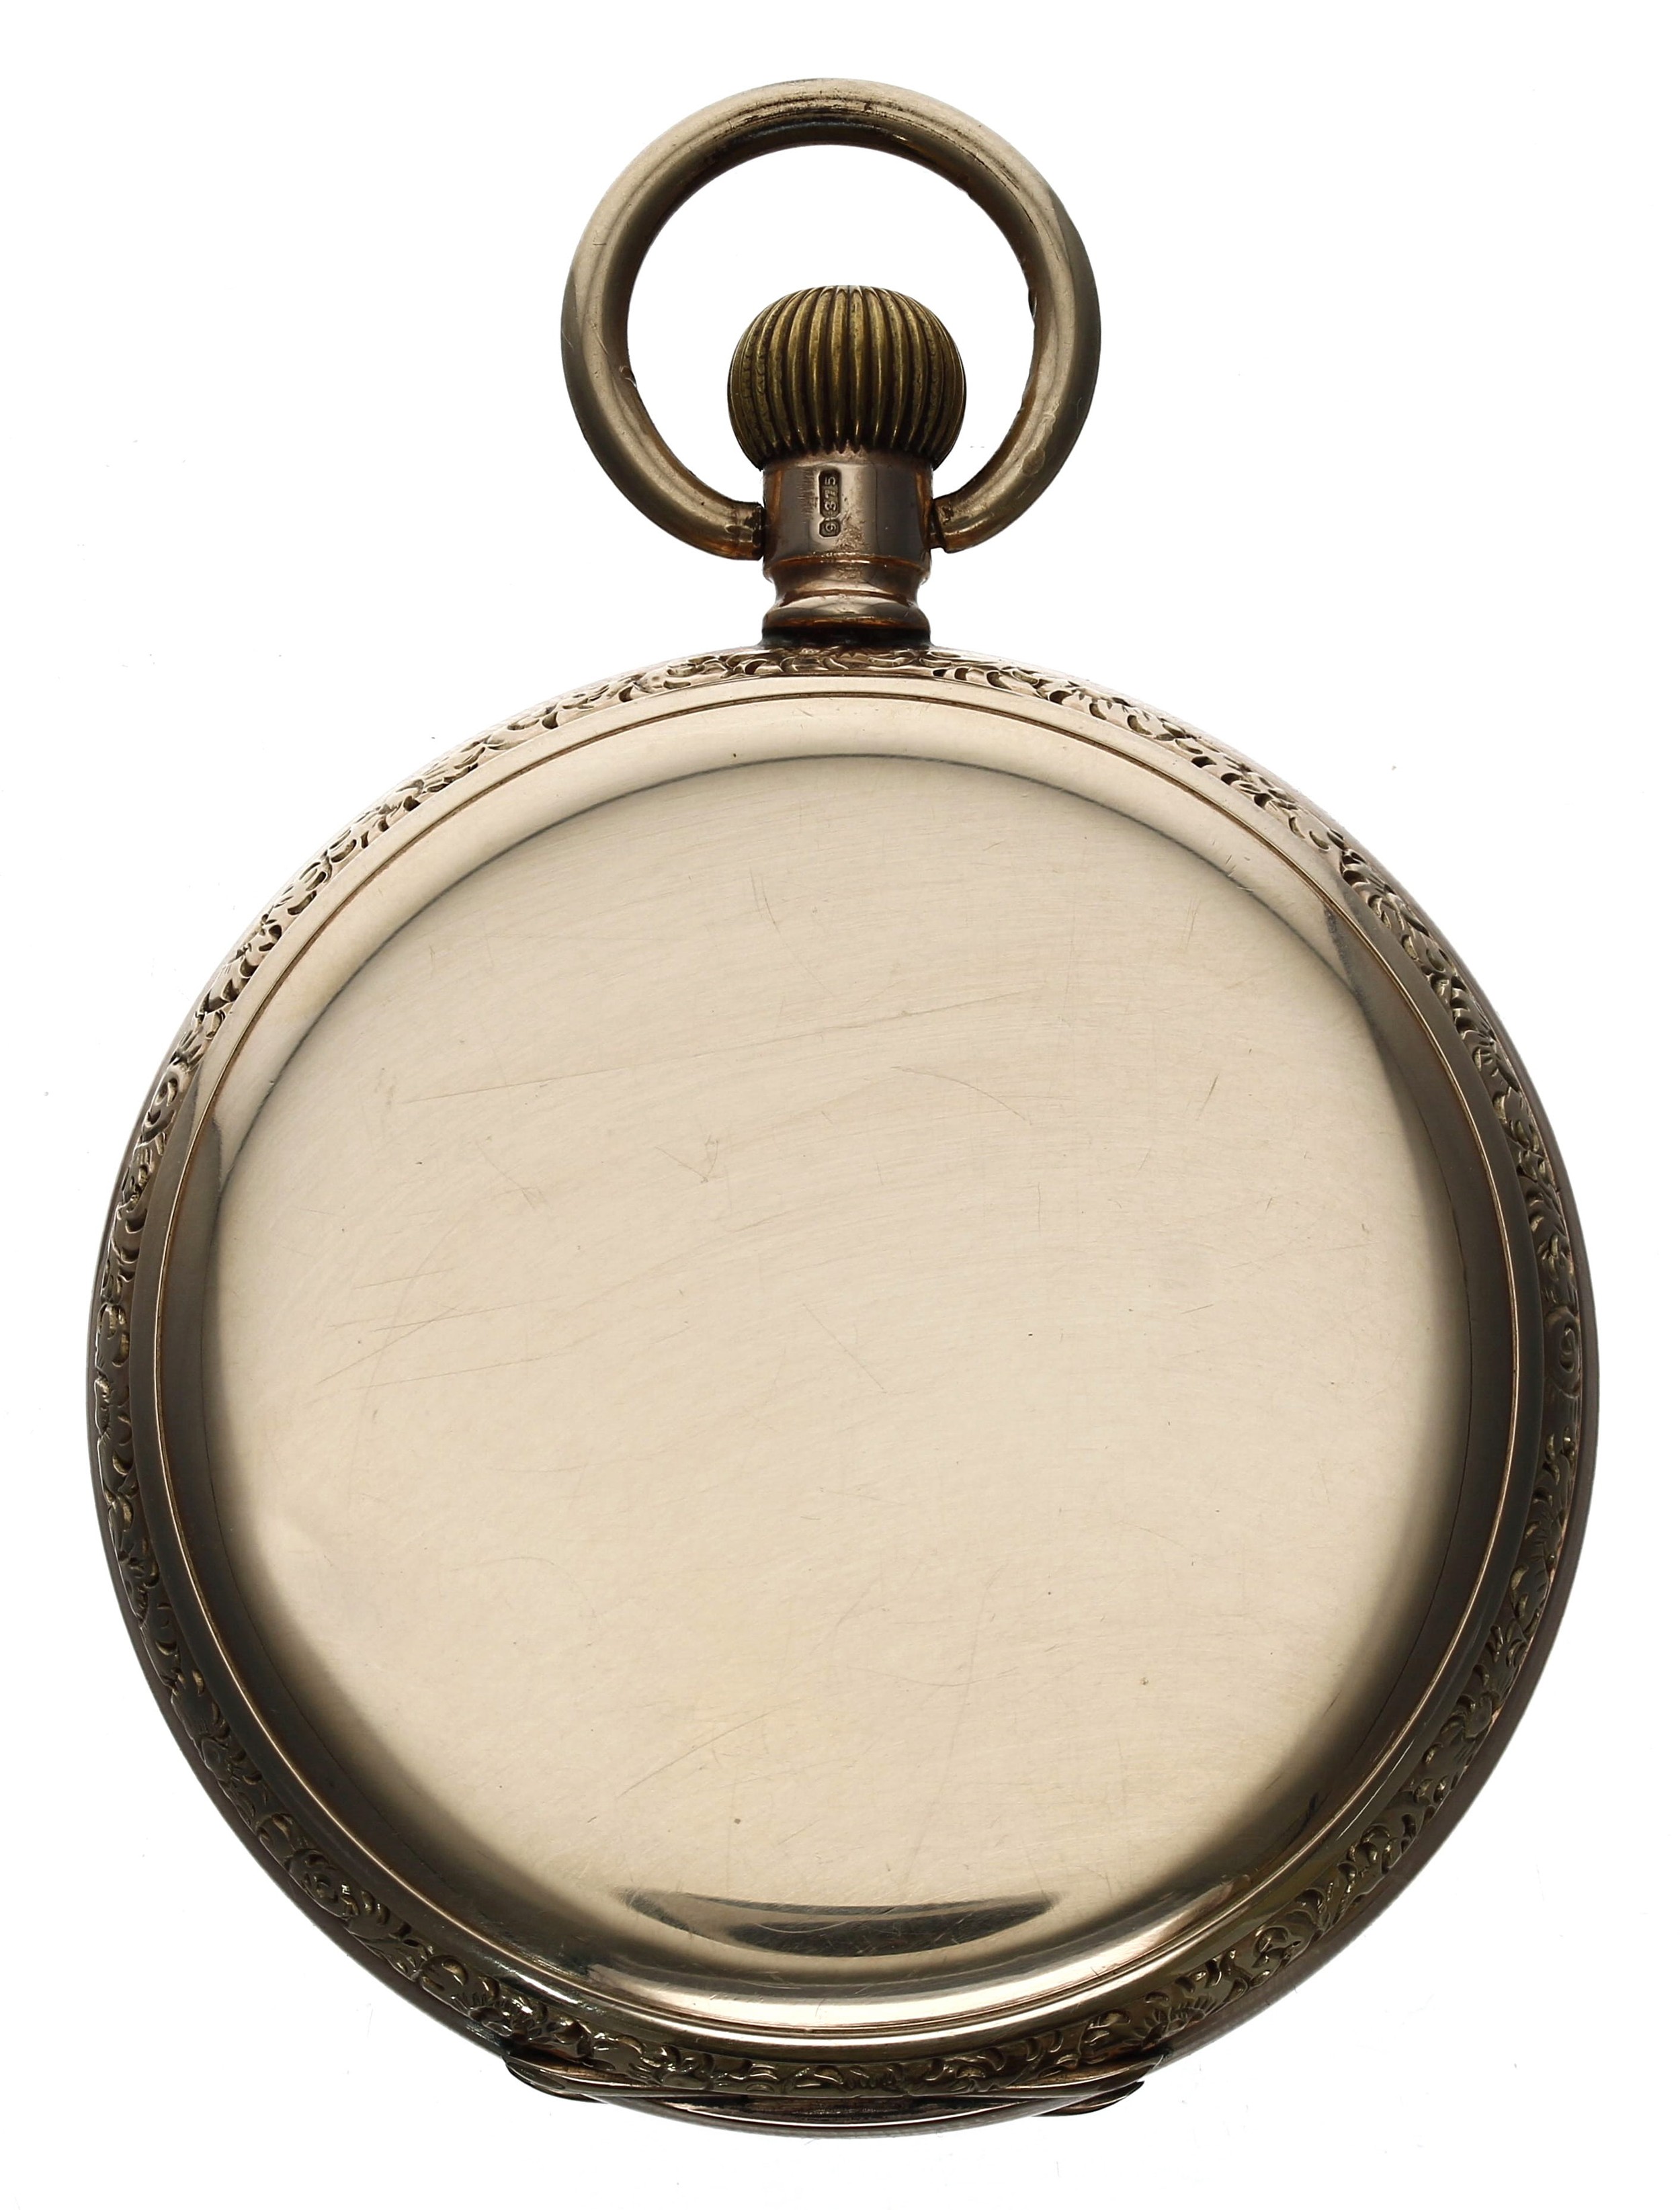 Clean 9ct full hunter pocket watch by Thomas Russell & Son, Liverpool, Chester 1915, signed lever - Image 3 of 5